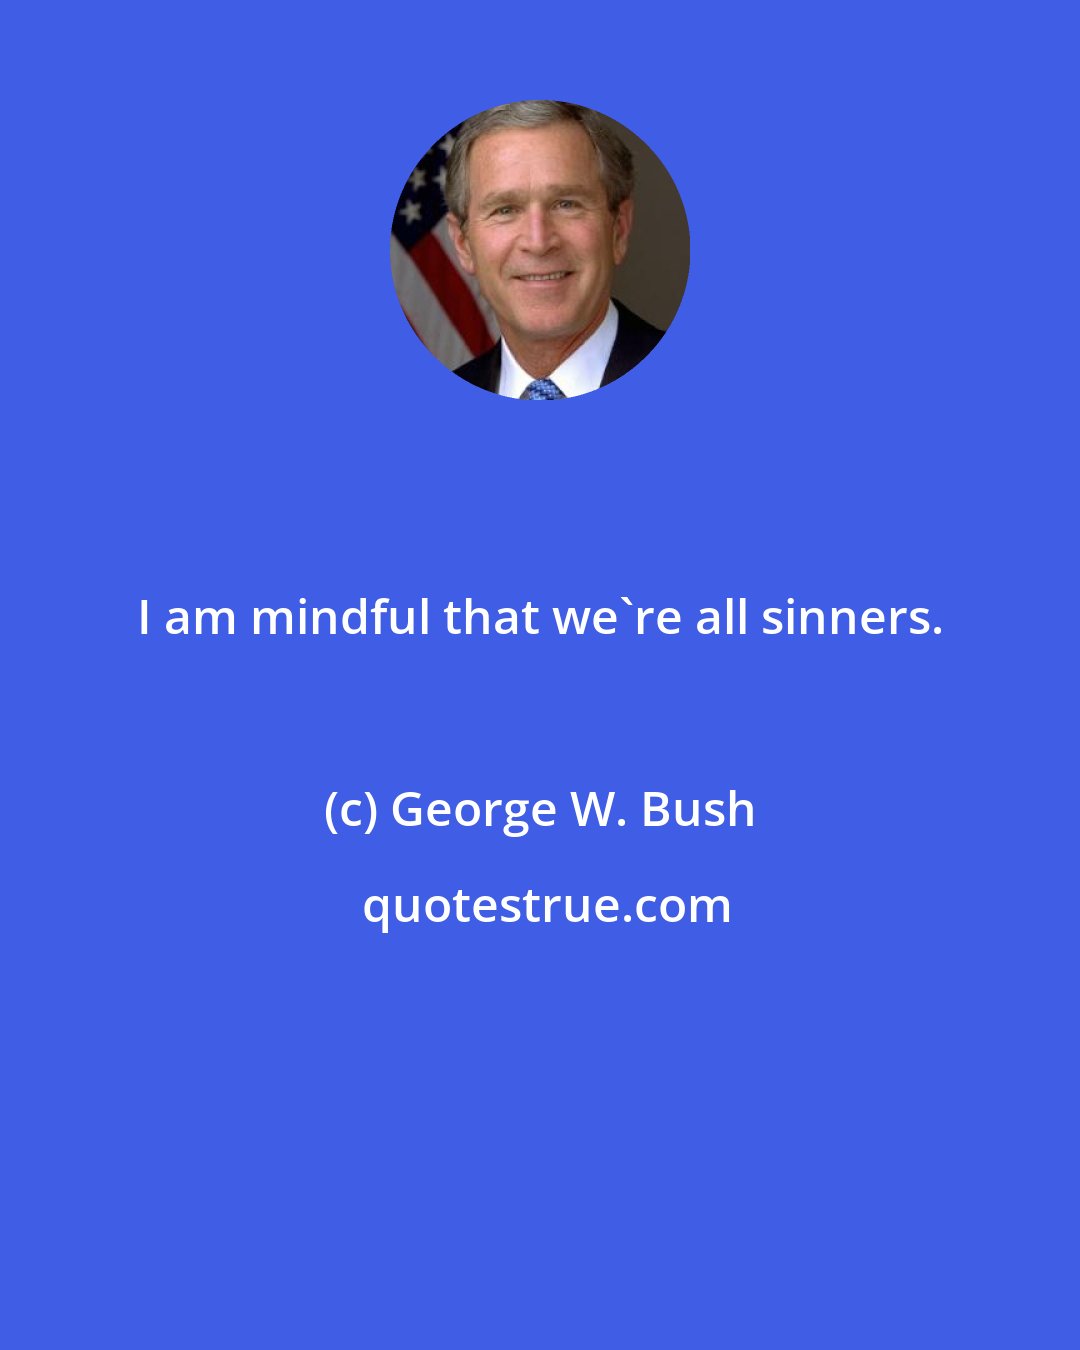 George W. Bush: I am mindful that we're all sinners.